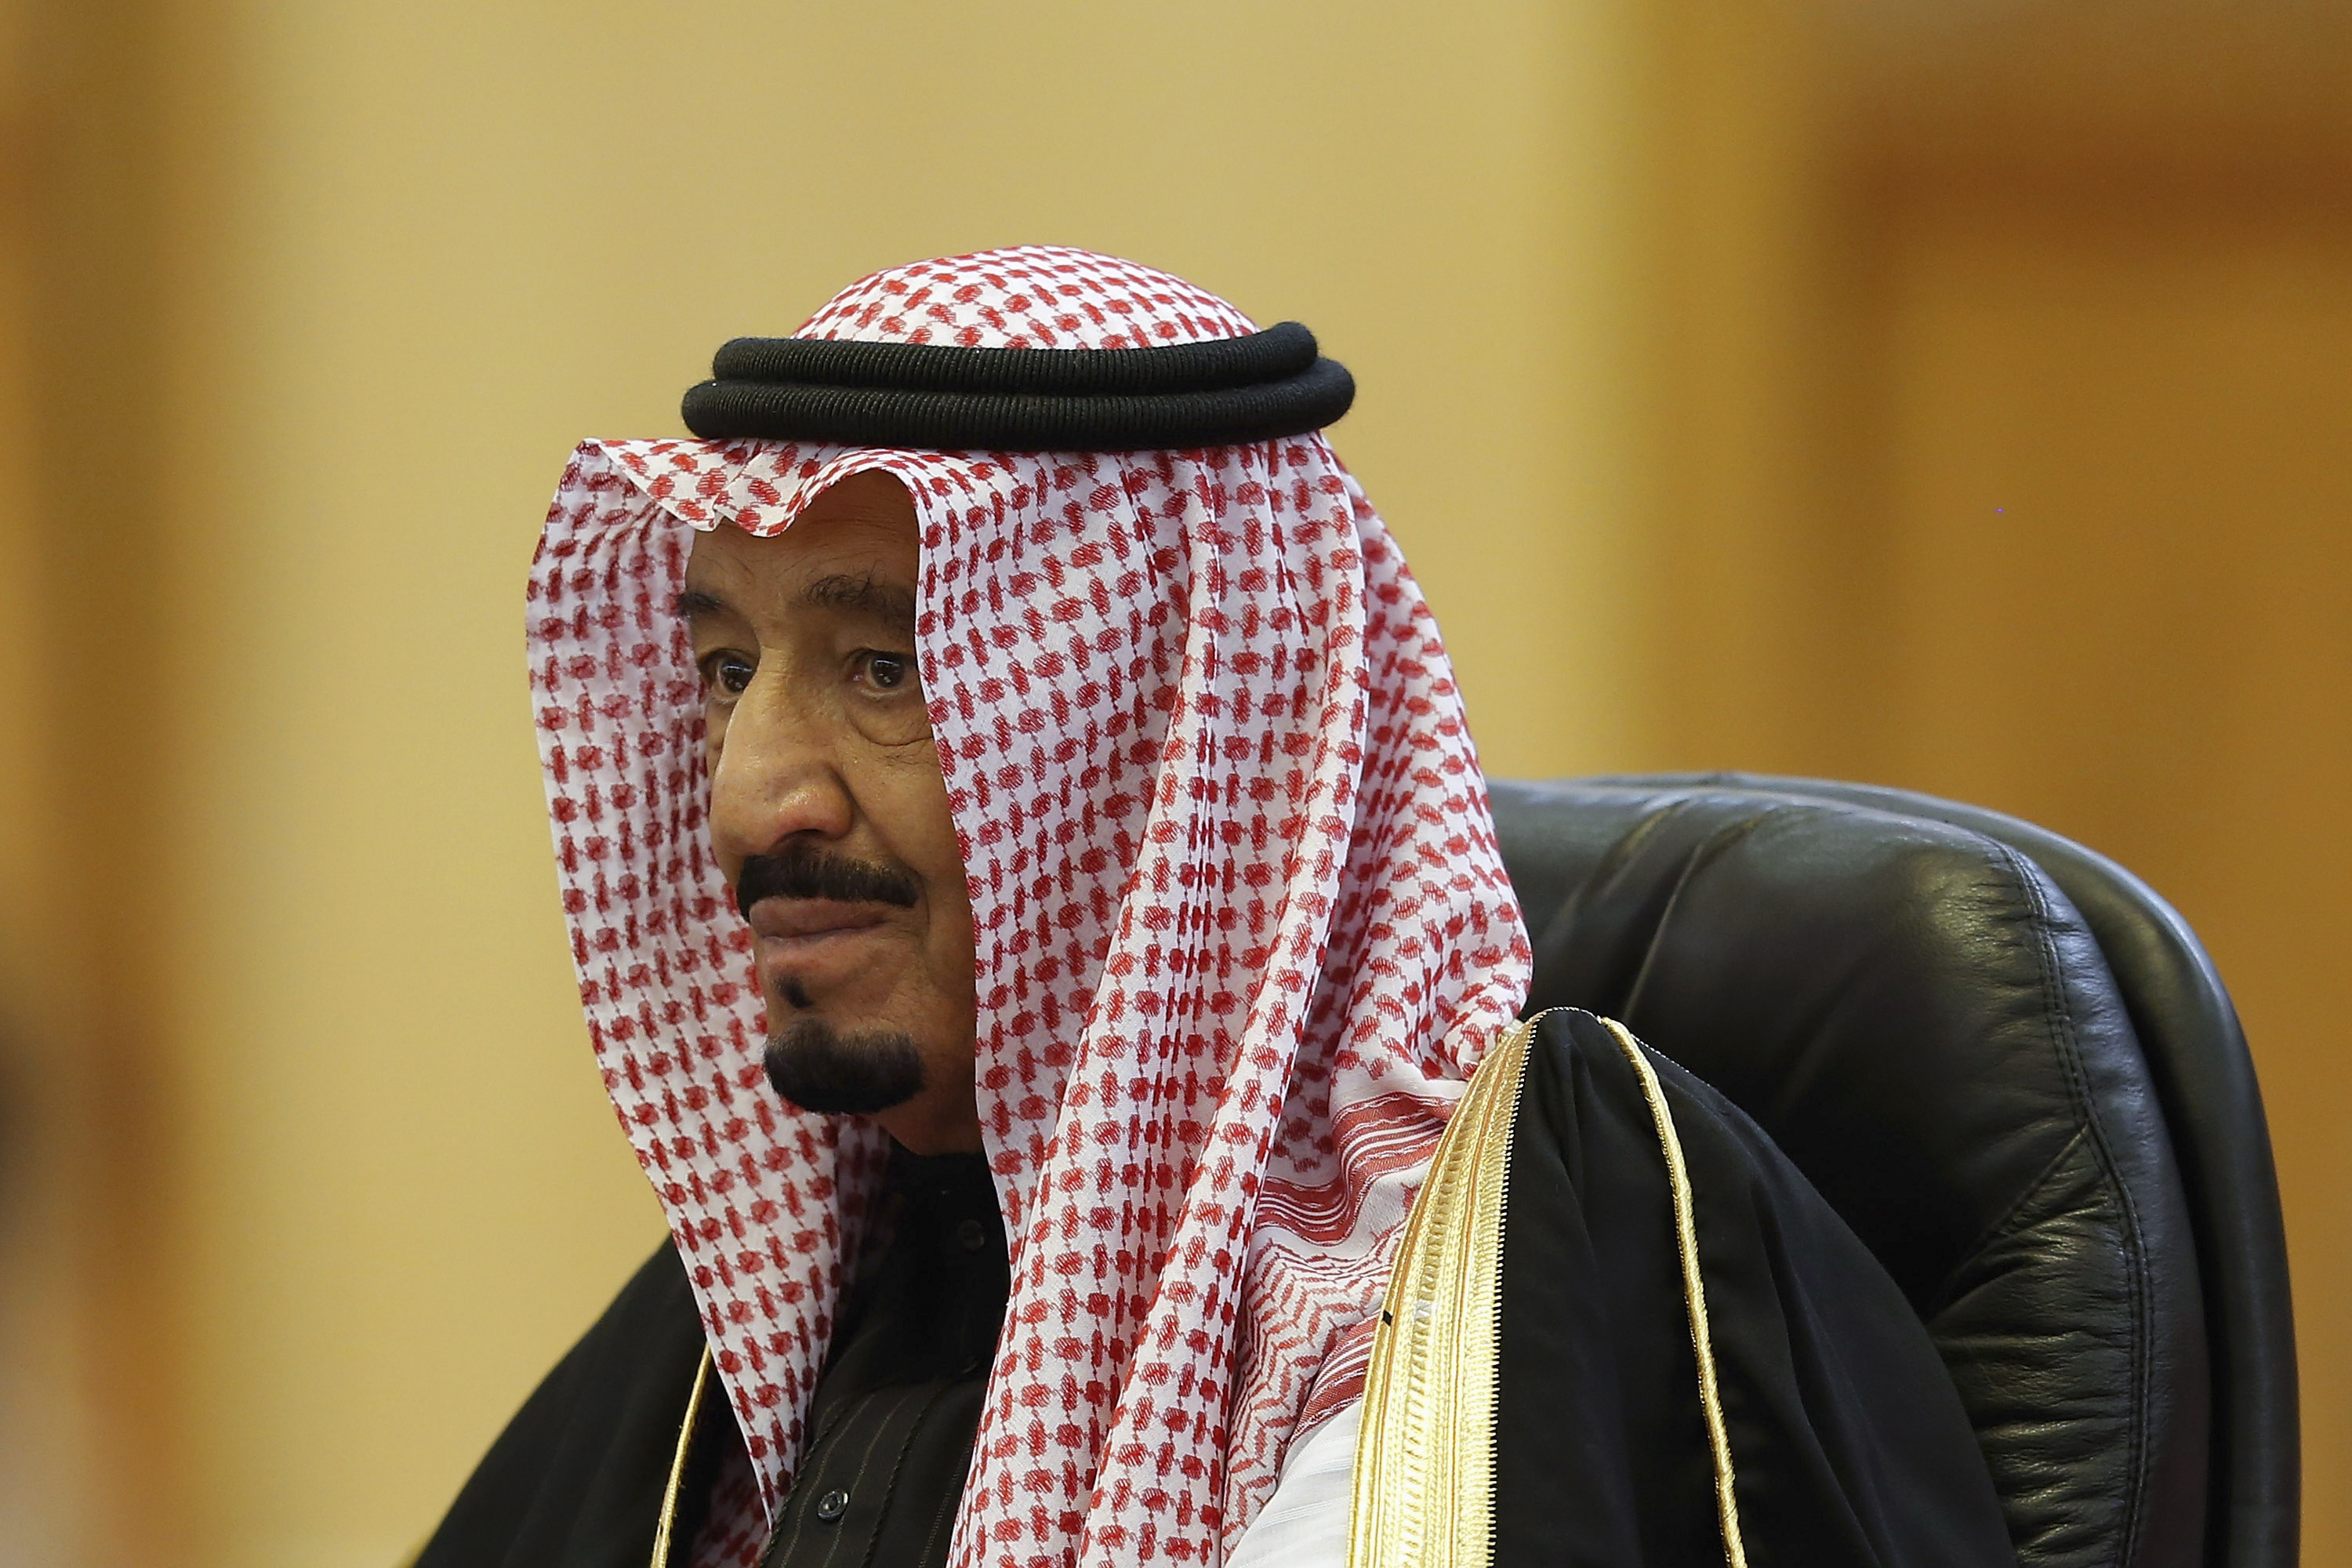 Saudi Arabia's King Salman looks on during a meeting at the Great Hall of the People in Beijing on March 13, 2014 (Lintao Zhang—POOL/Reuters)